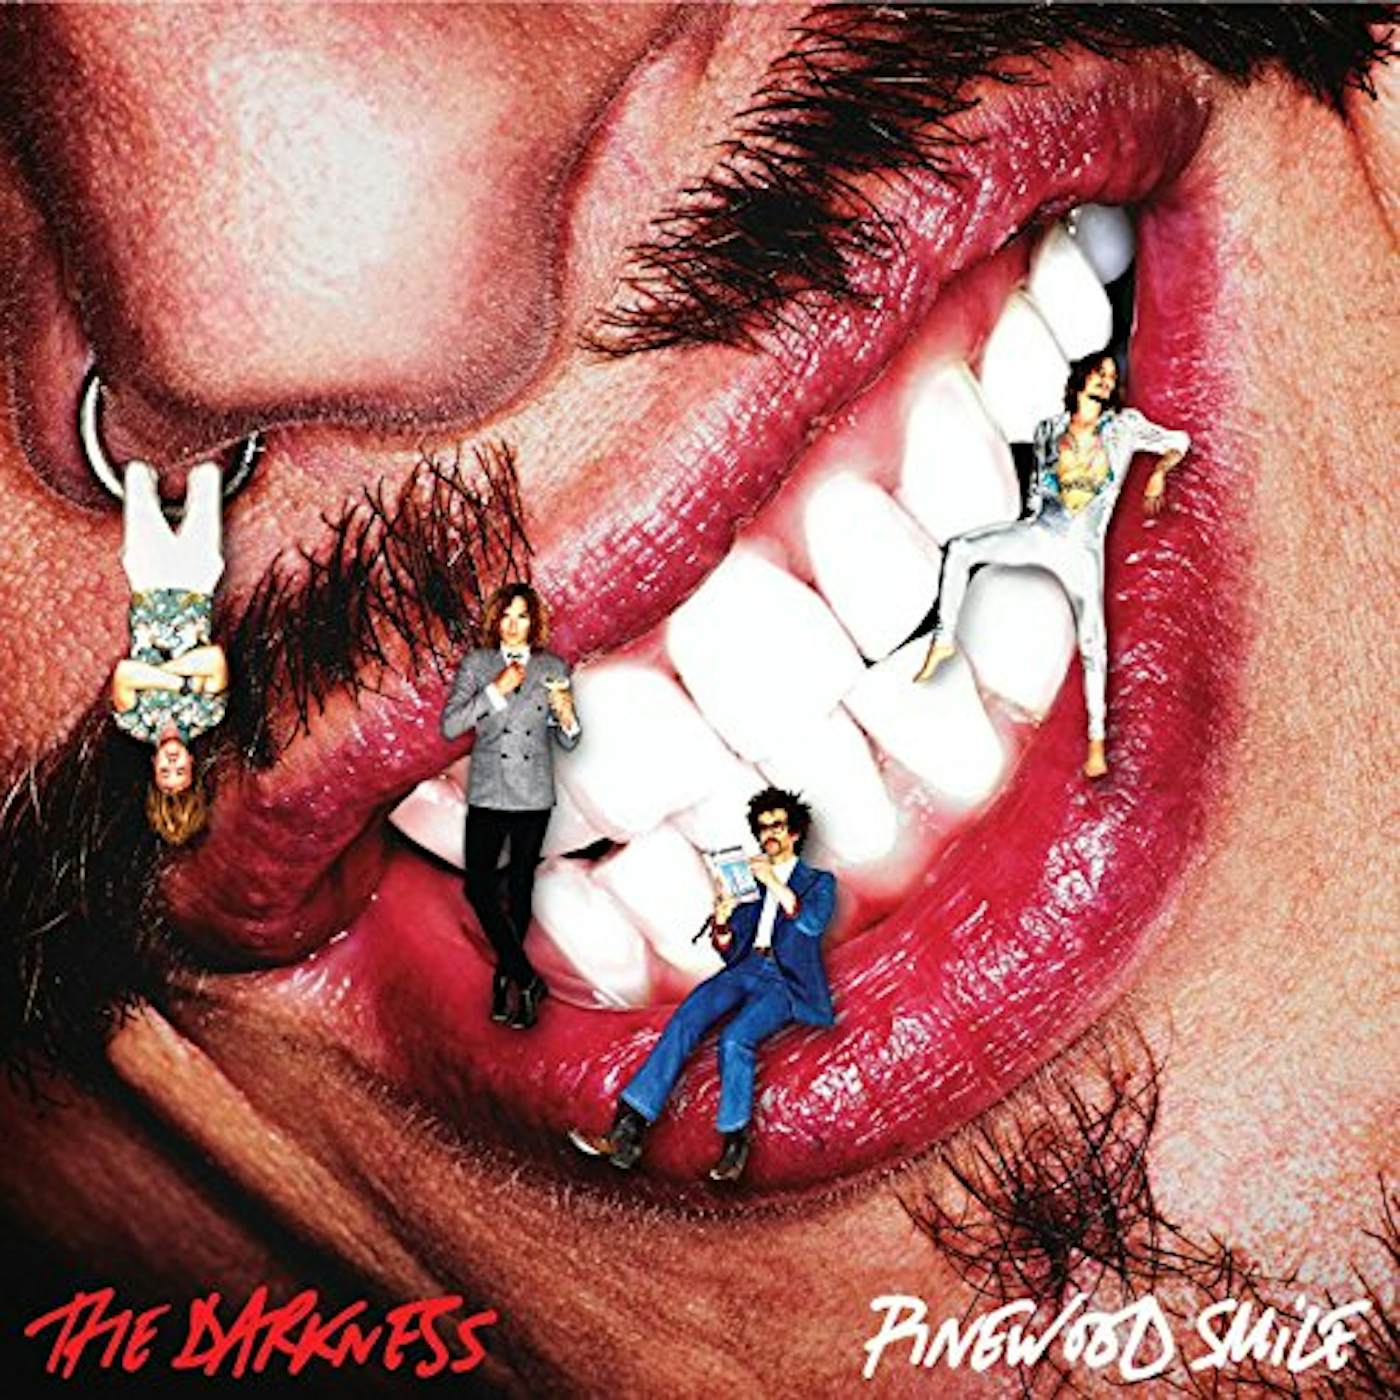 The Darkness Pinewood Smile Vinyl Record